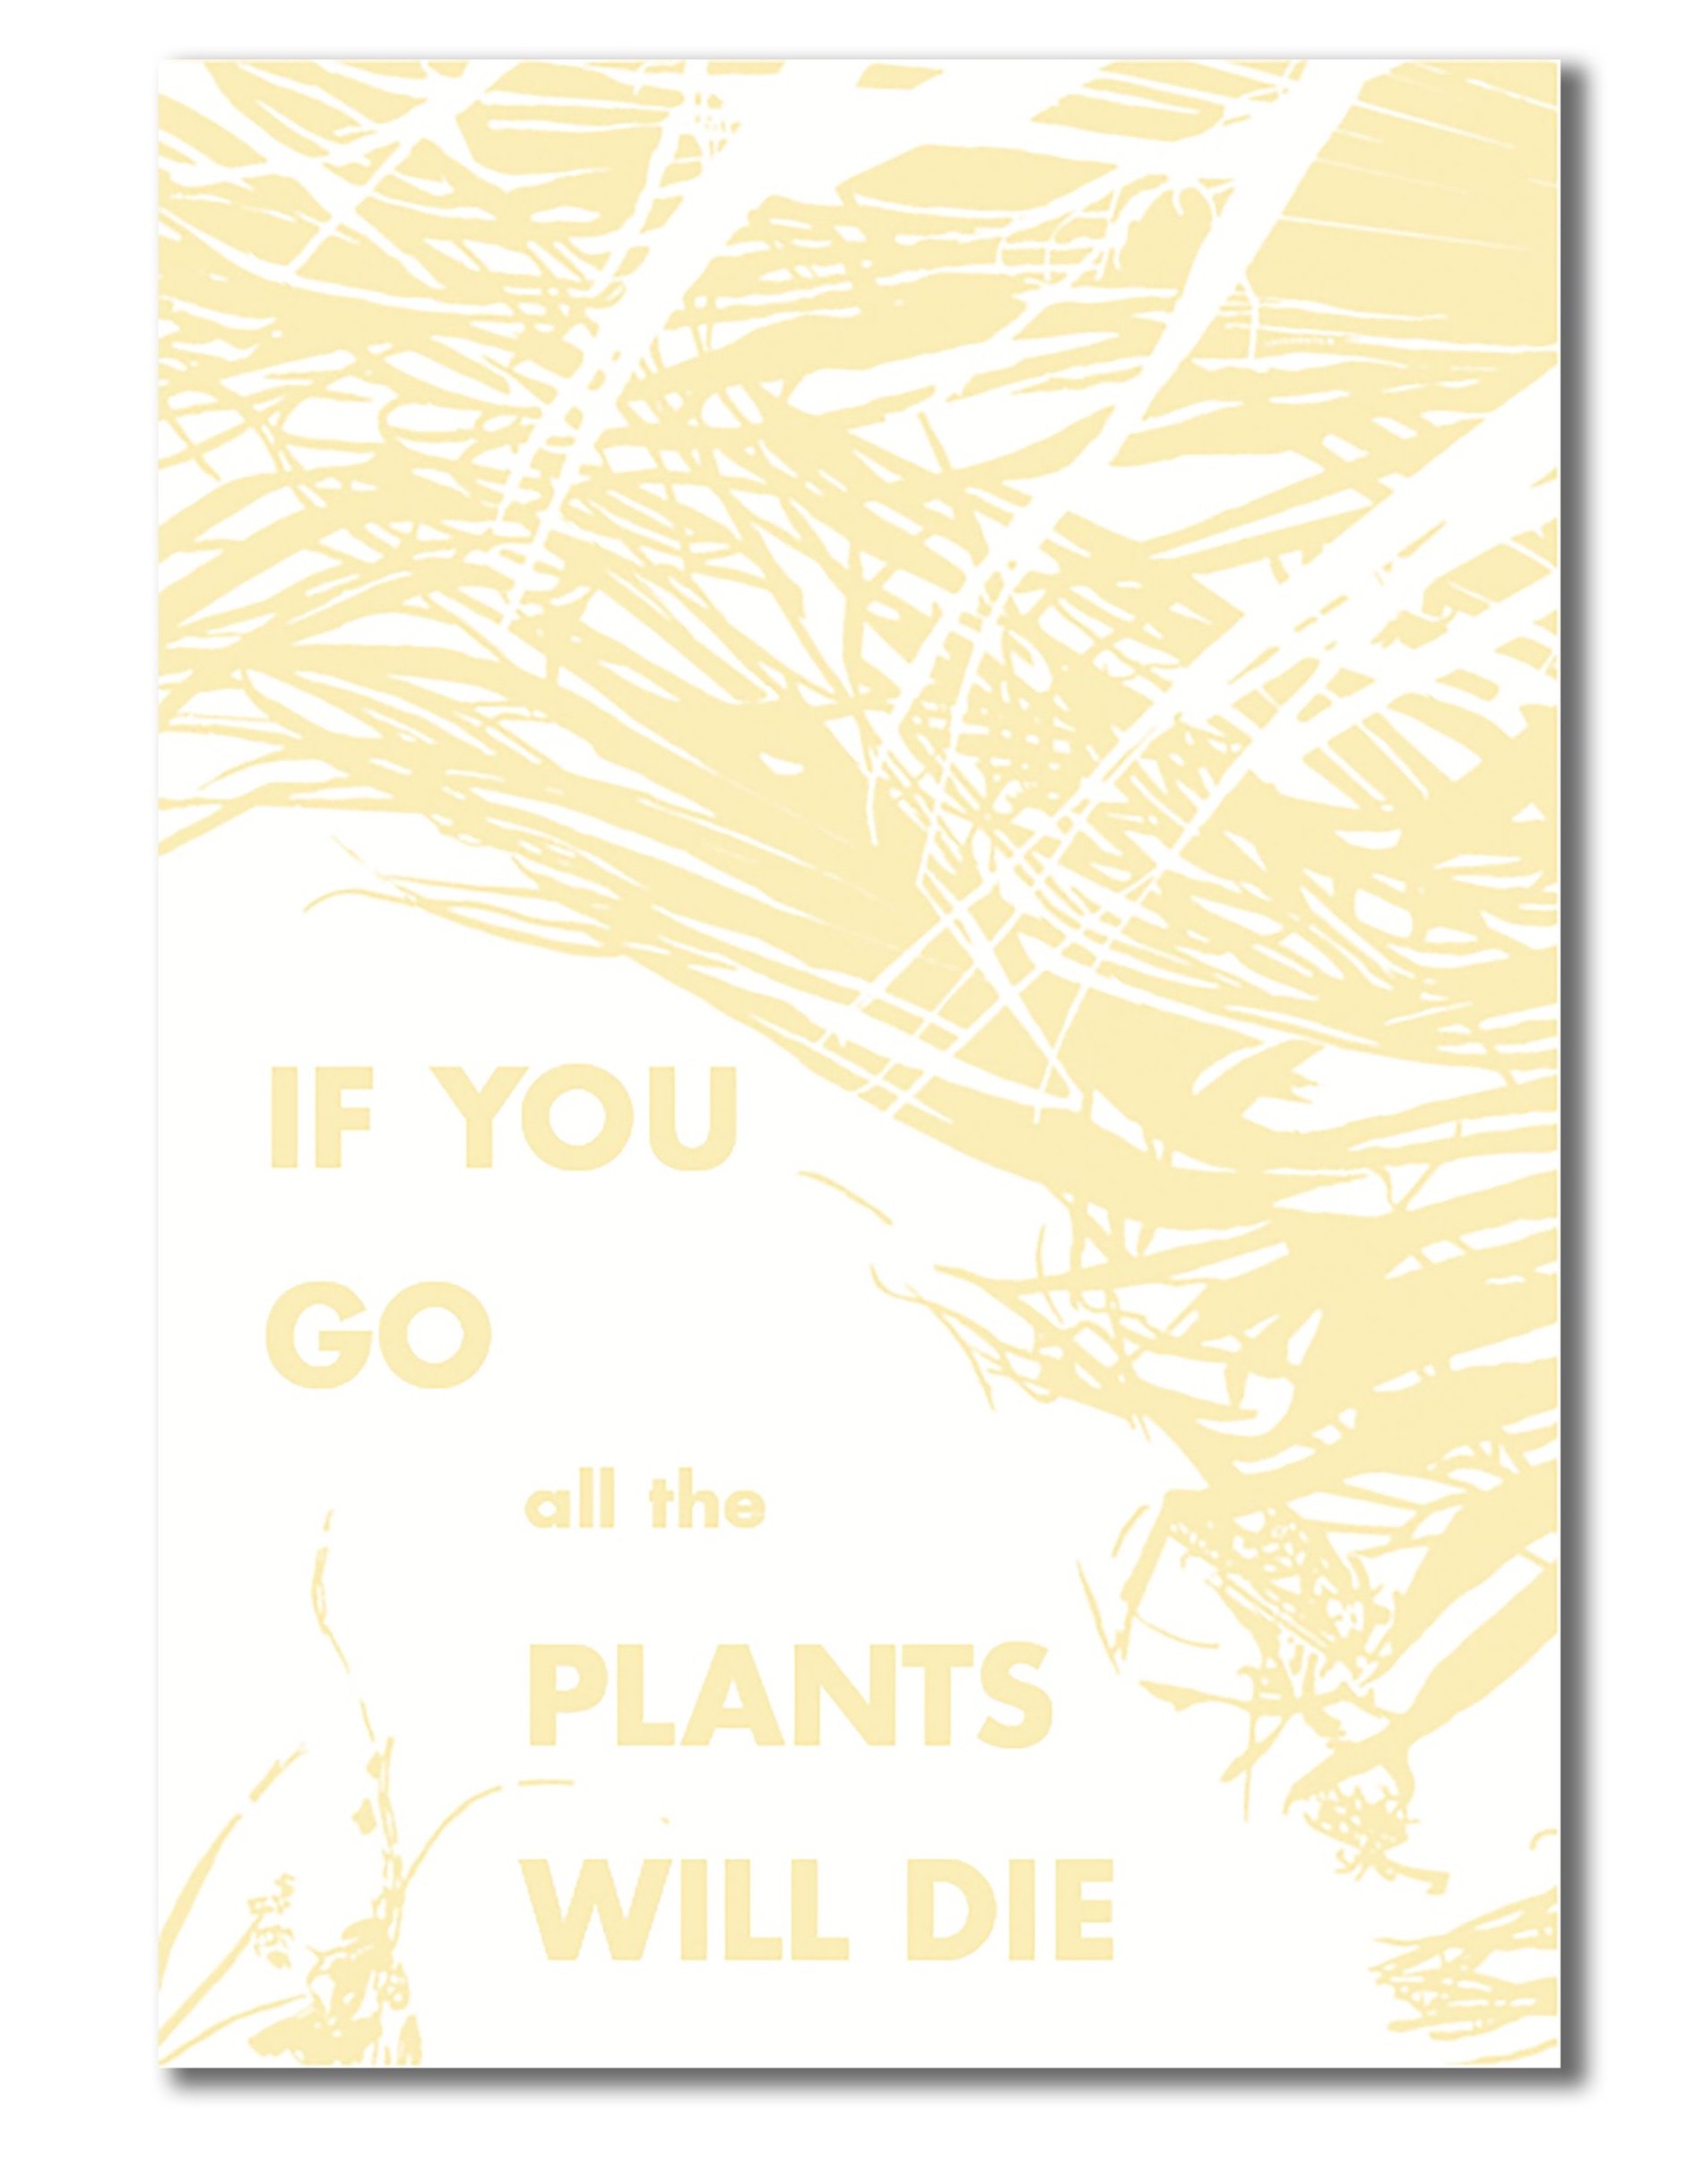 IF YOU GO, ALL THE PLANTS WILL DIE